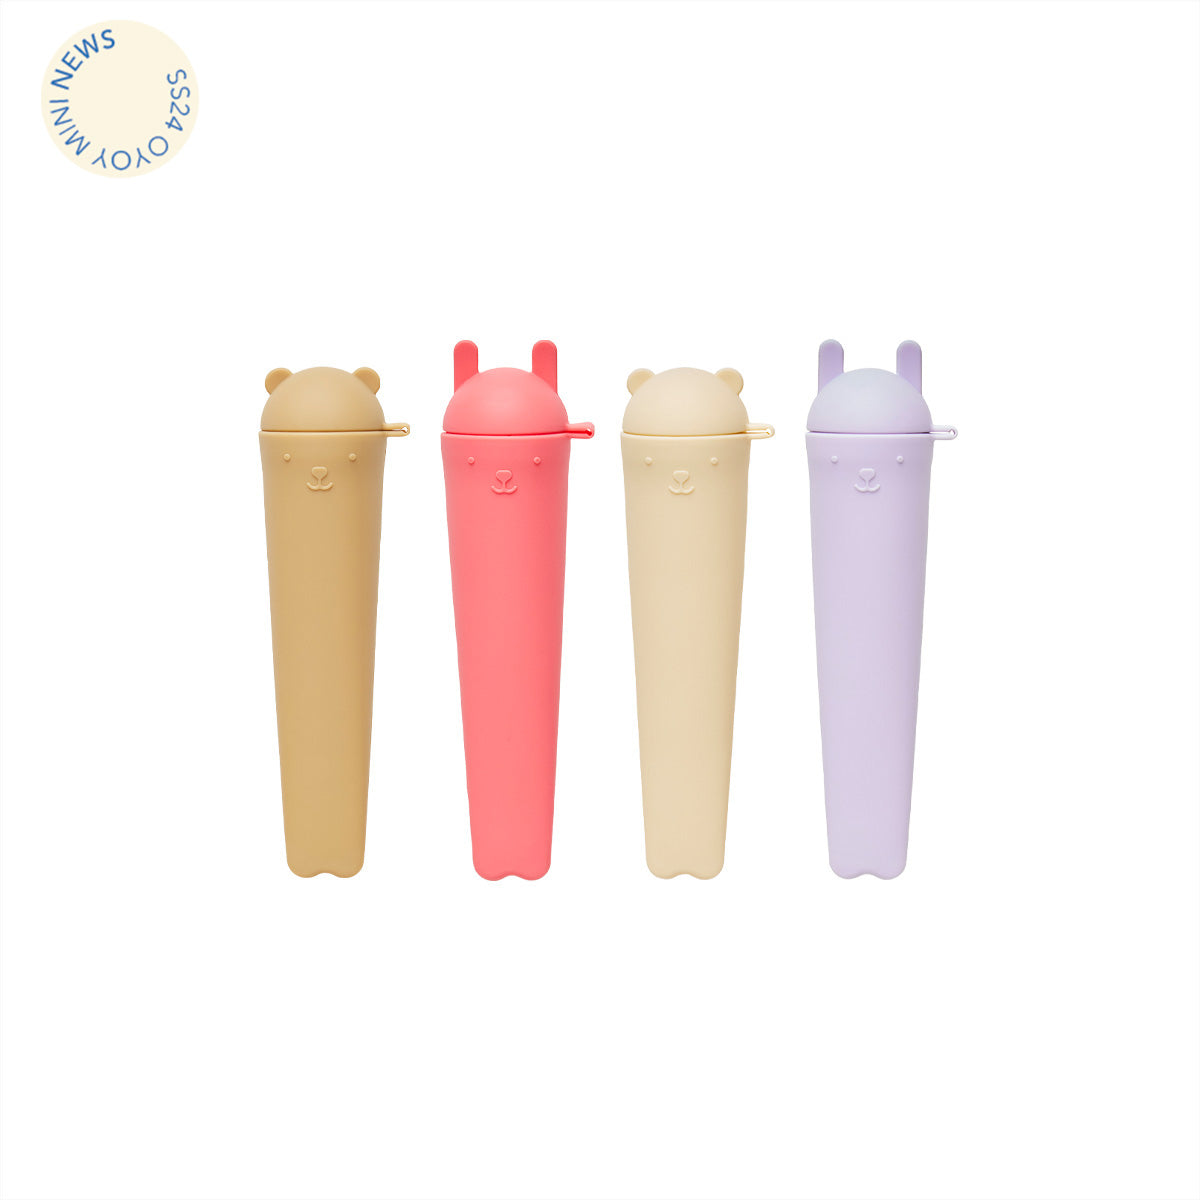 OYOY MINI Ninka & Teddy Ice Pops - Pack of 4 Dining Ware 501 Lavender / Vanilla / Cherry Red / Rubber